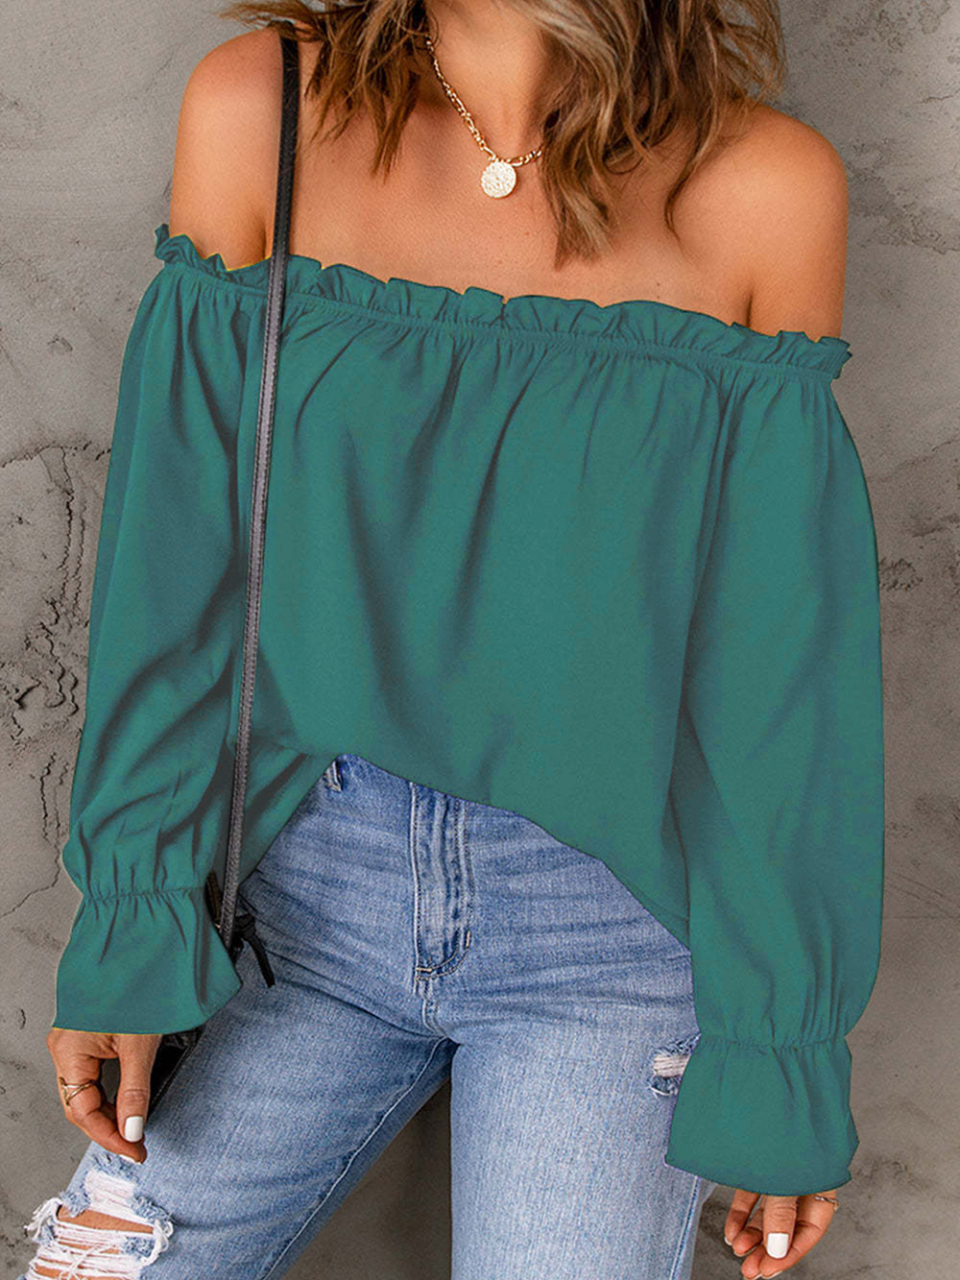 One-neck chiffon shirt solid color pullover sexy off-the-shoulder top